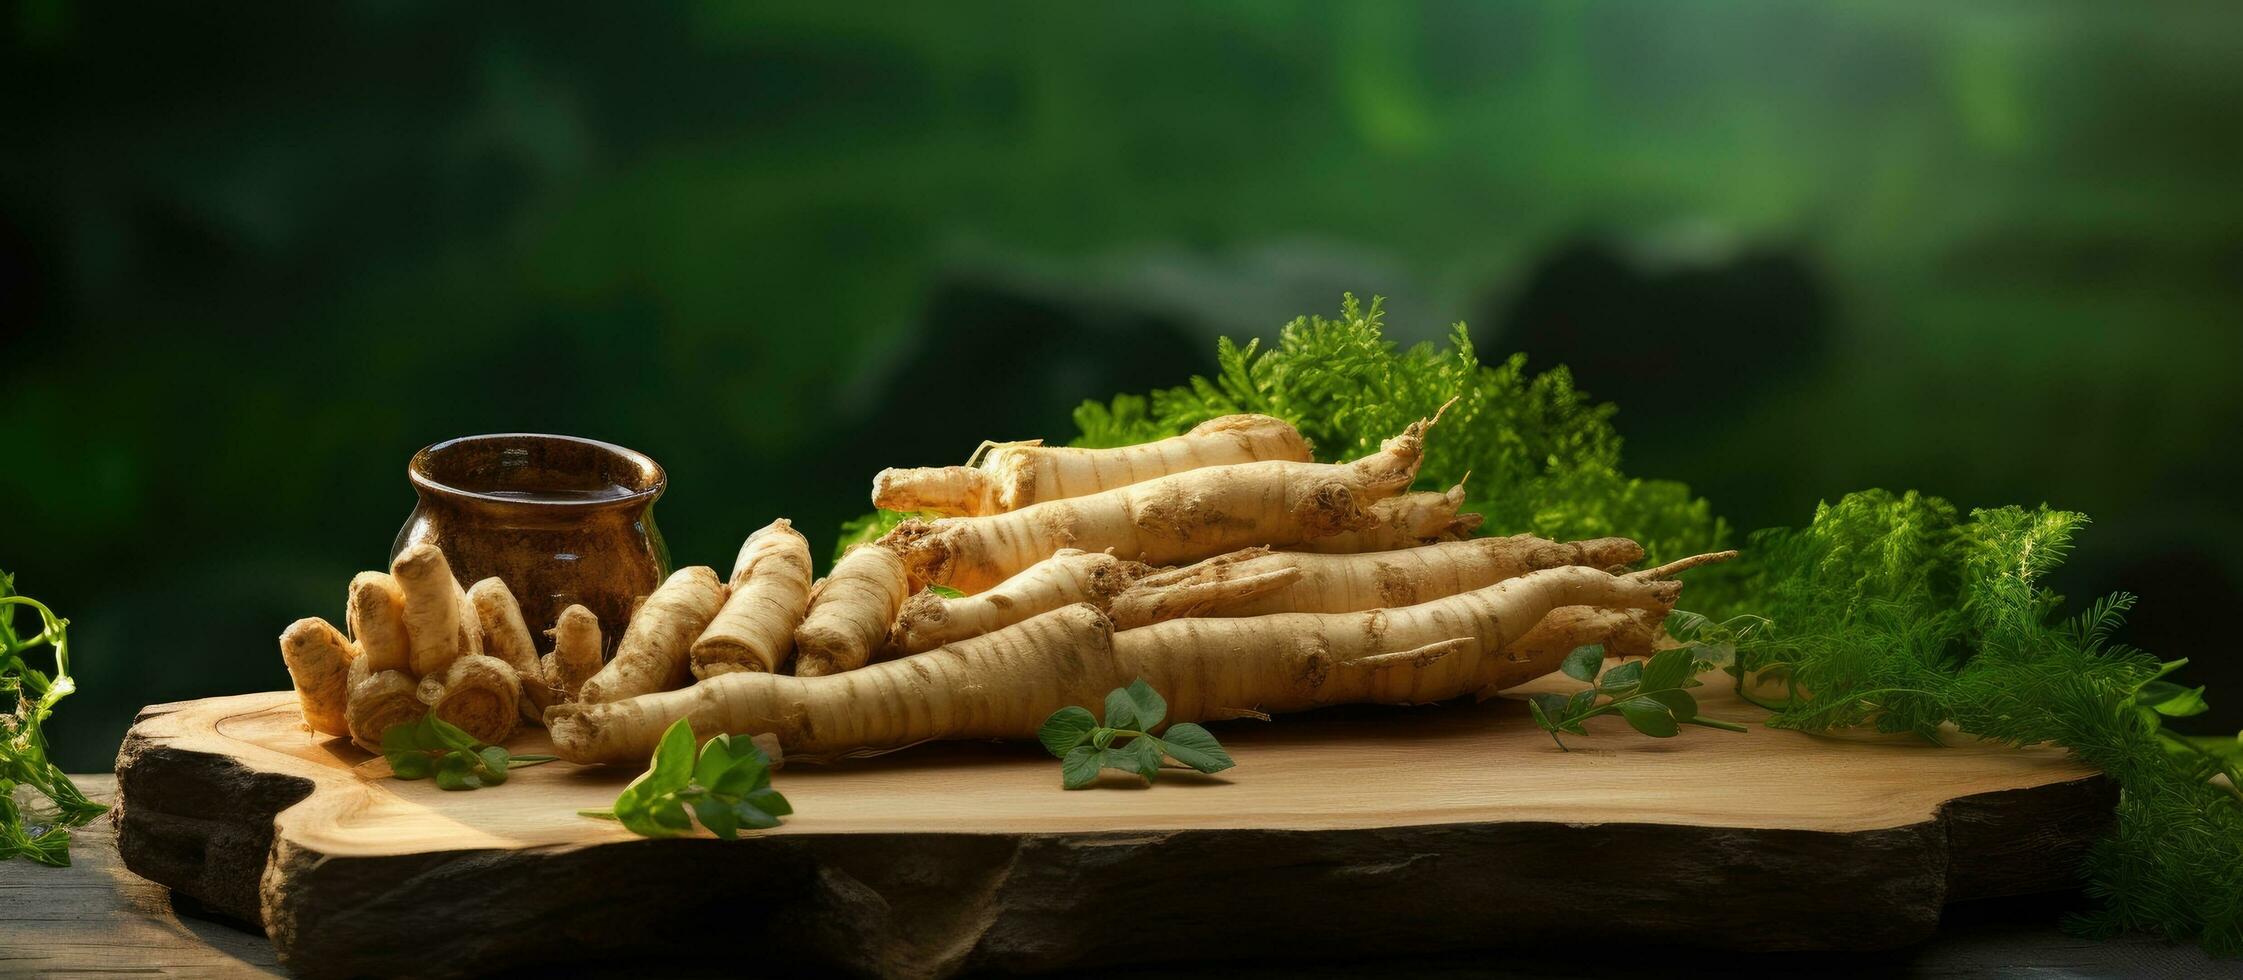 Ginseng roots and slices are placed on a rectangular wooden plate against a natural background photo